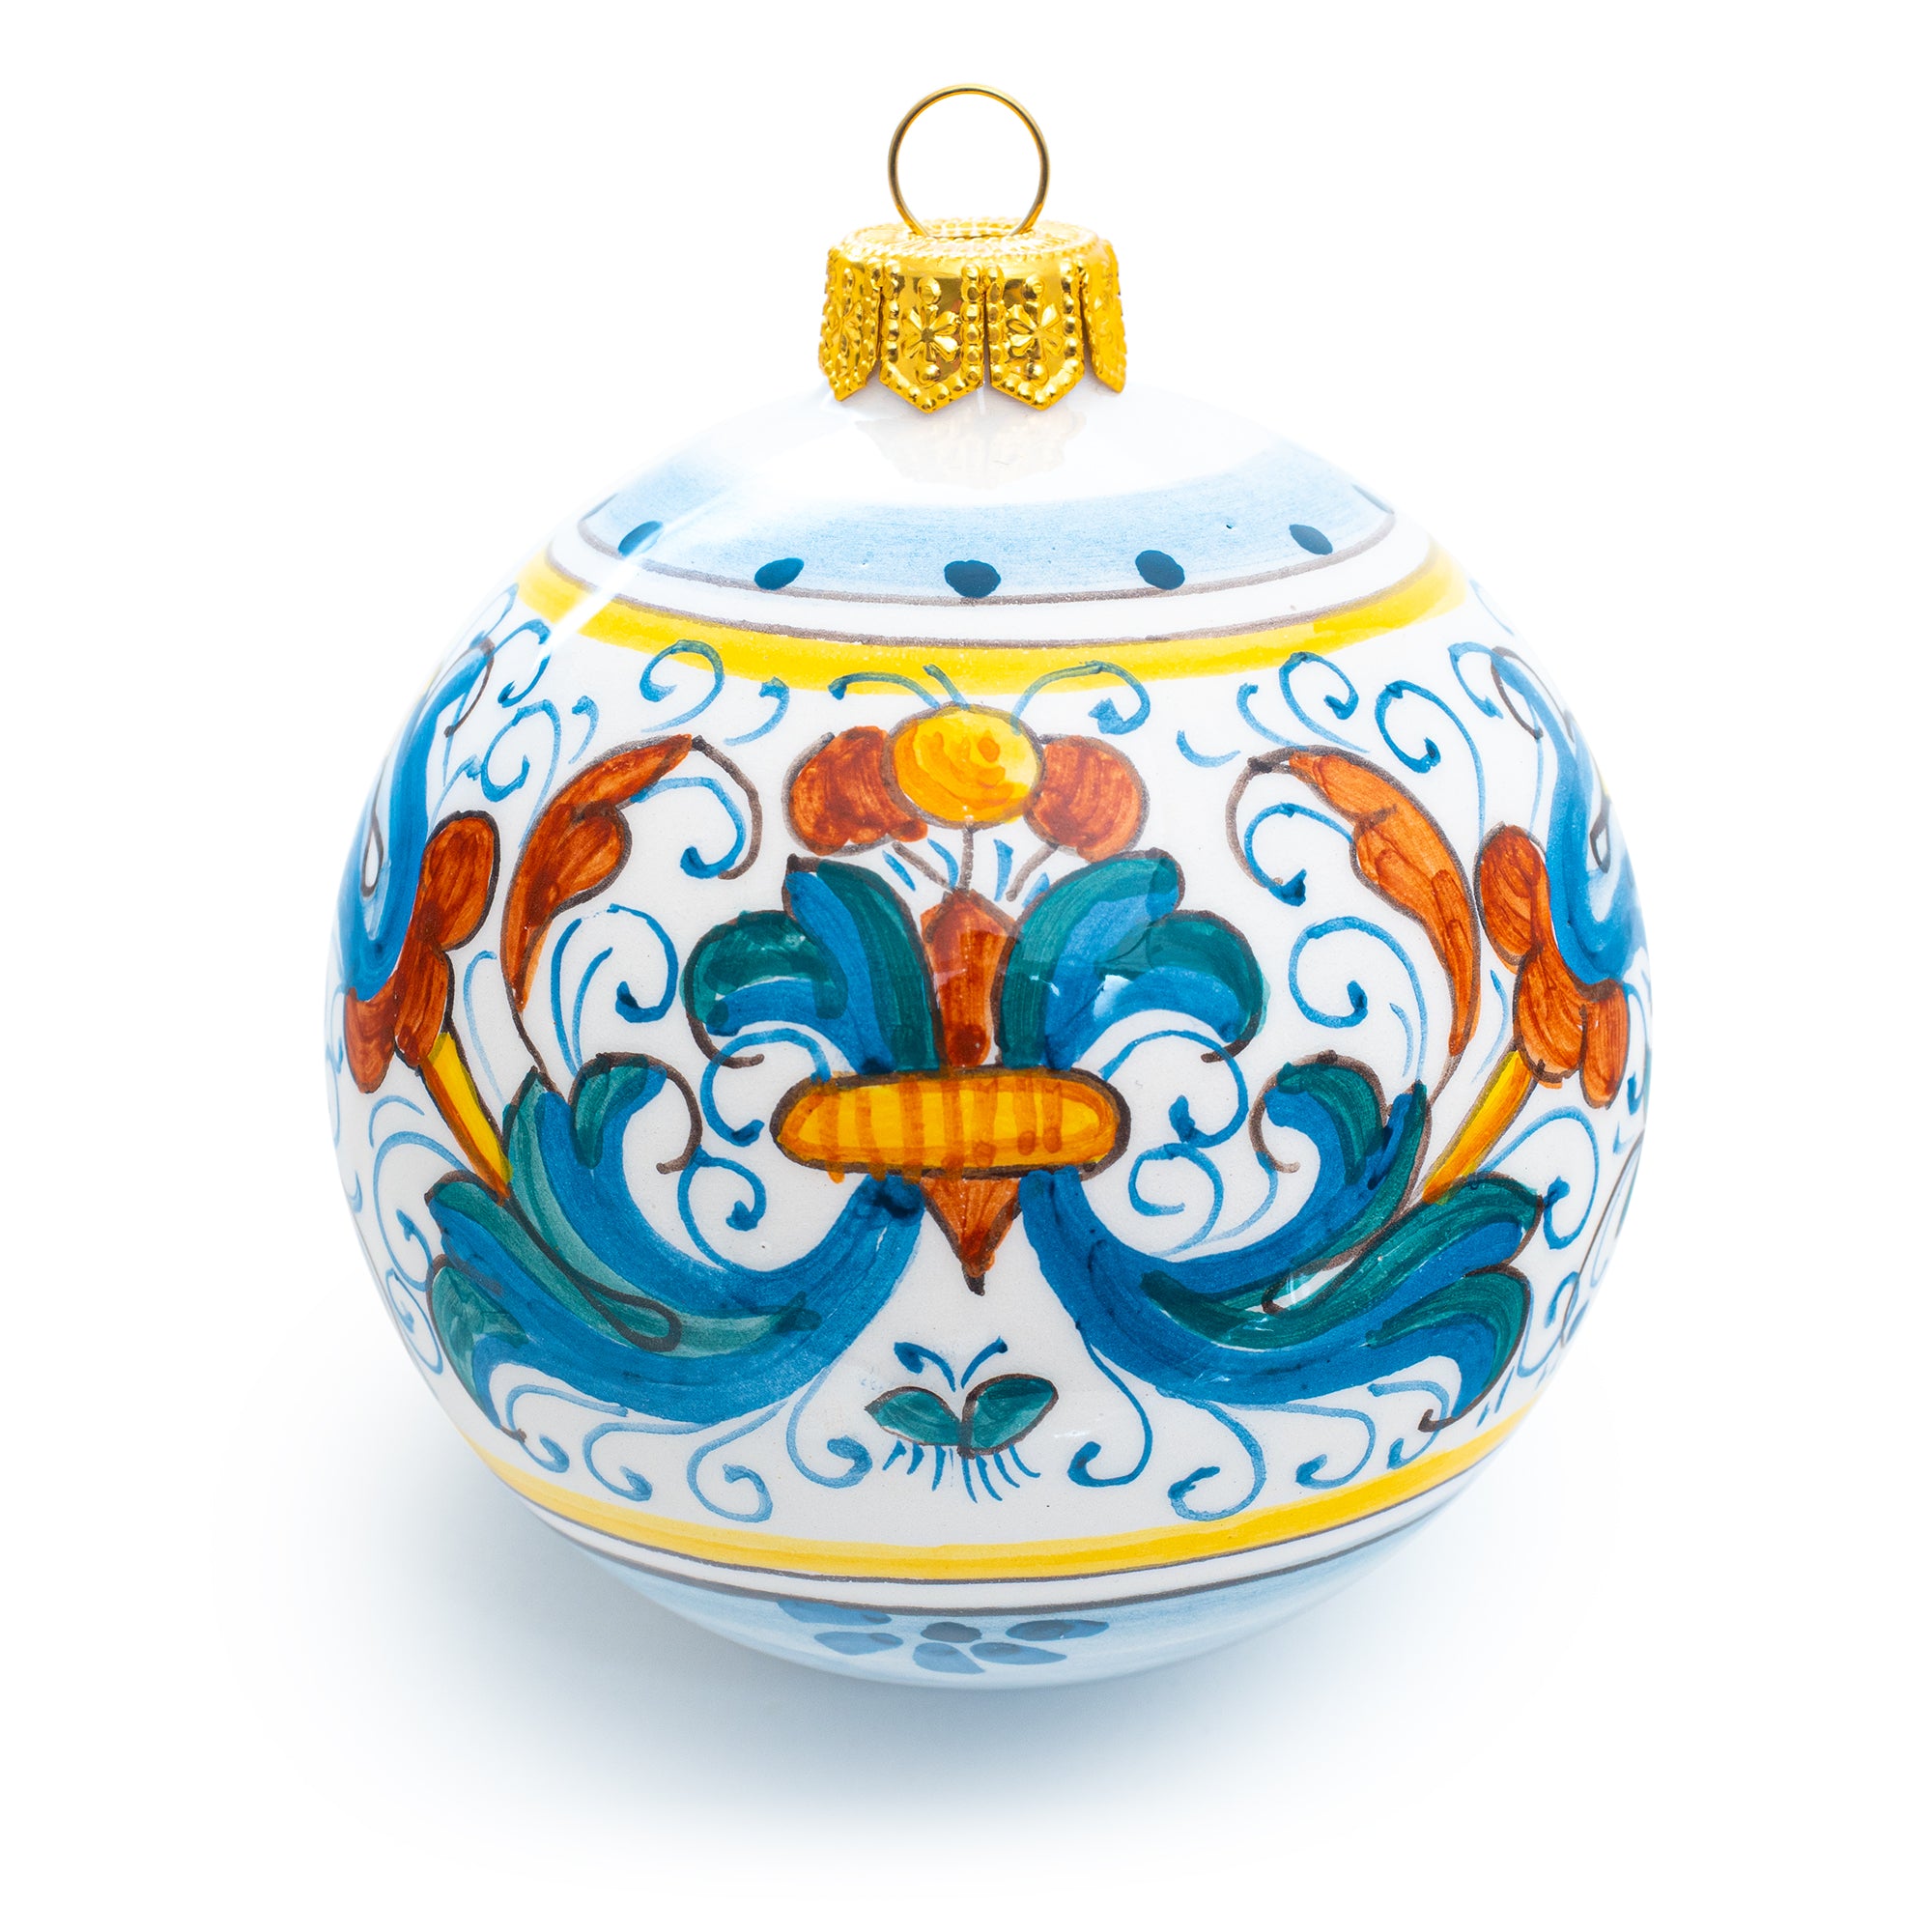 Pia's Ricco Deruta Ornament - Set of 6, ceramics, pottery, italian design, majolica, handmade, handcrafted, handpainted, home decor, kitchen art, home goods, deruta, majolica, Artisan, treasures, traditional art, modern art, gift ideas, style, SF, shop small business, artists, shop online, landmark store, legacy, one of a kind, limited edition, gift guide, gift shop, retail shop, decorations, shopping, italy, home staging, home decorating, home interiors